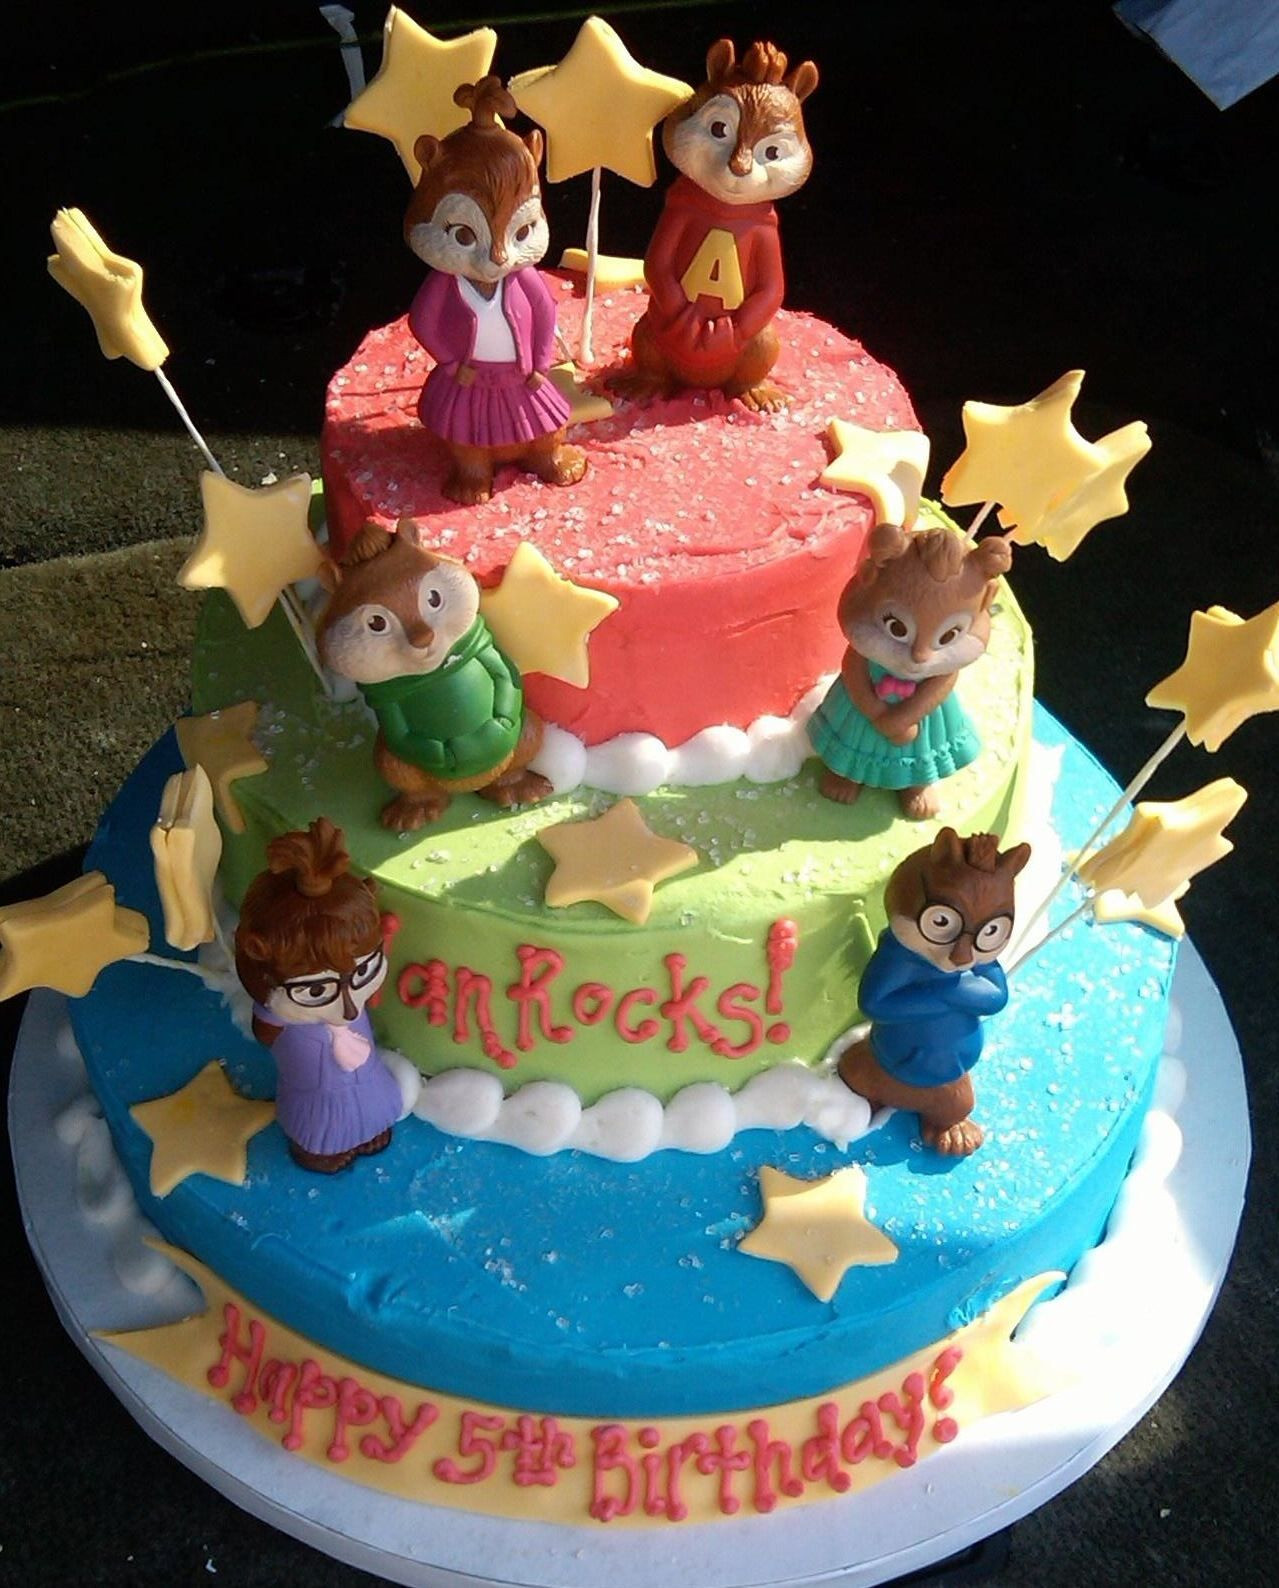 Alvin And The Chipmunks Birthday Cake
 Alvin and the Chipmunks Cake Party Ideas